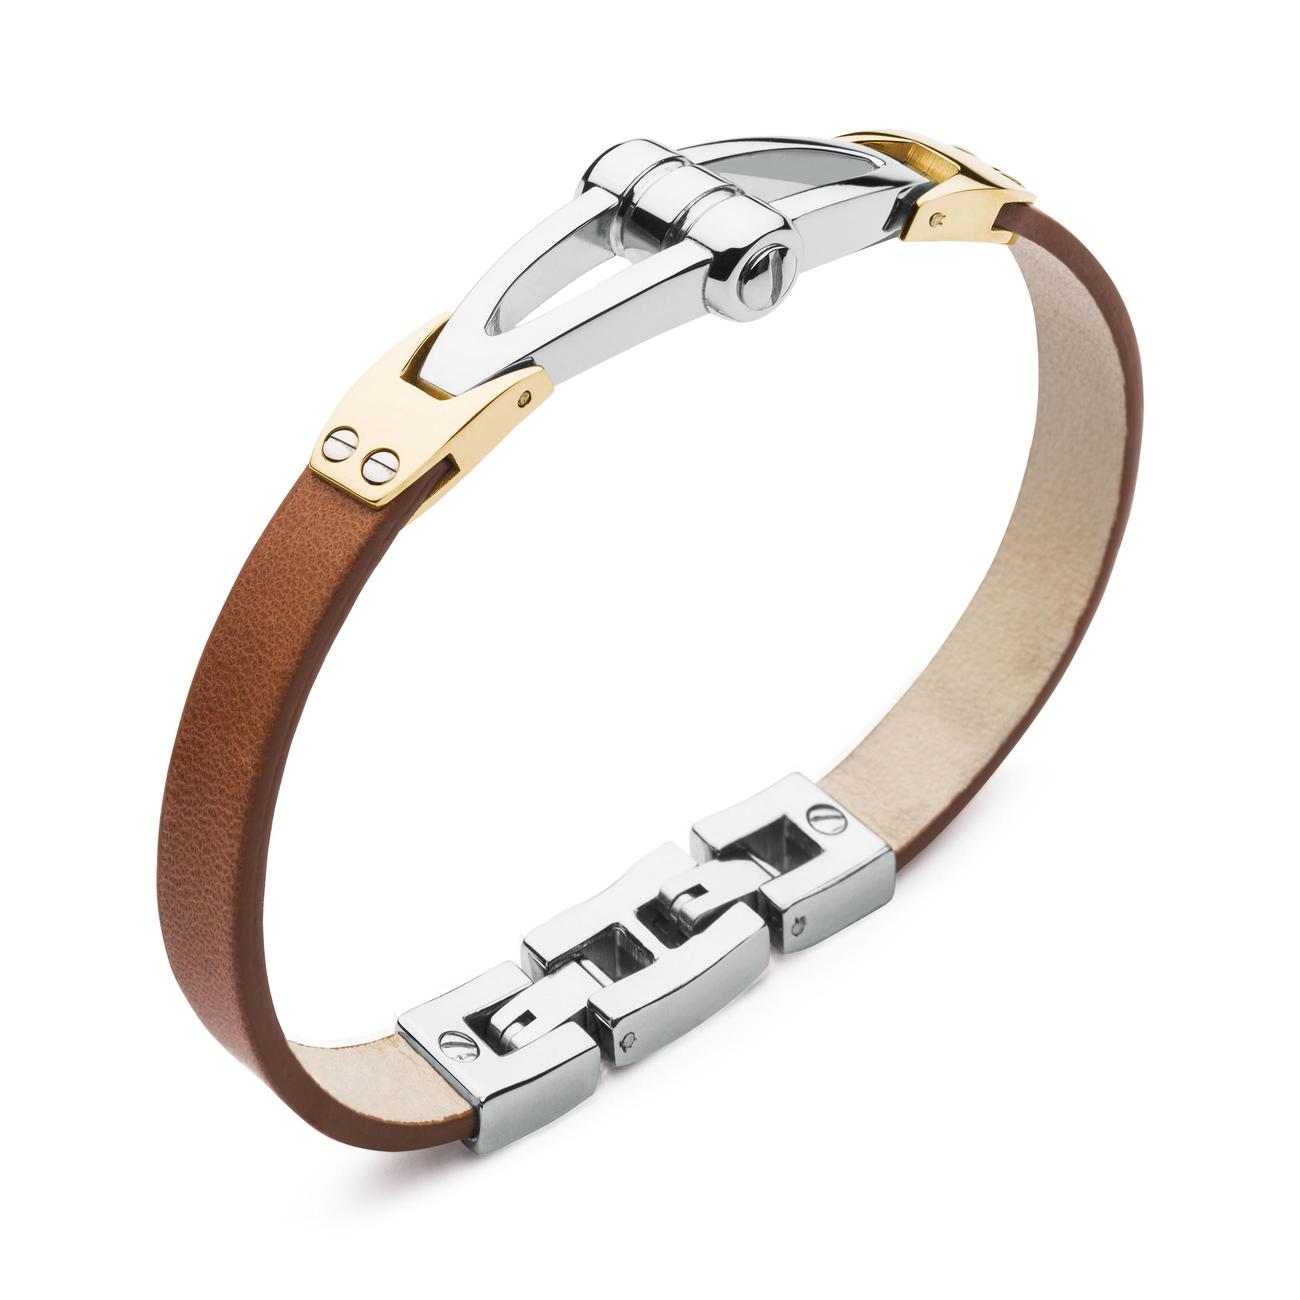 Bracelet Leather and Gold PVD | Brosway Italia | Luby 